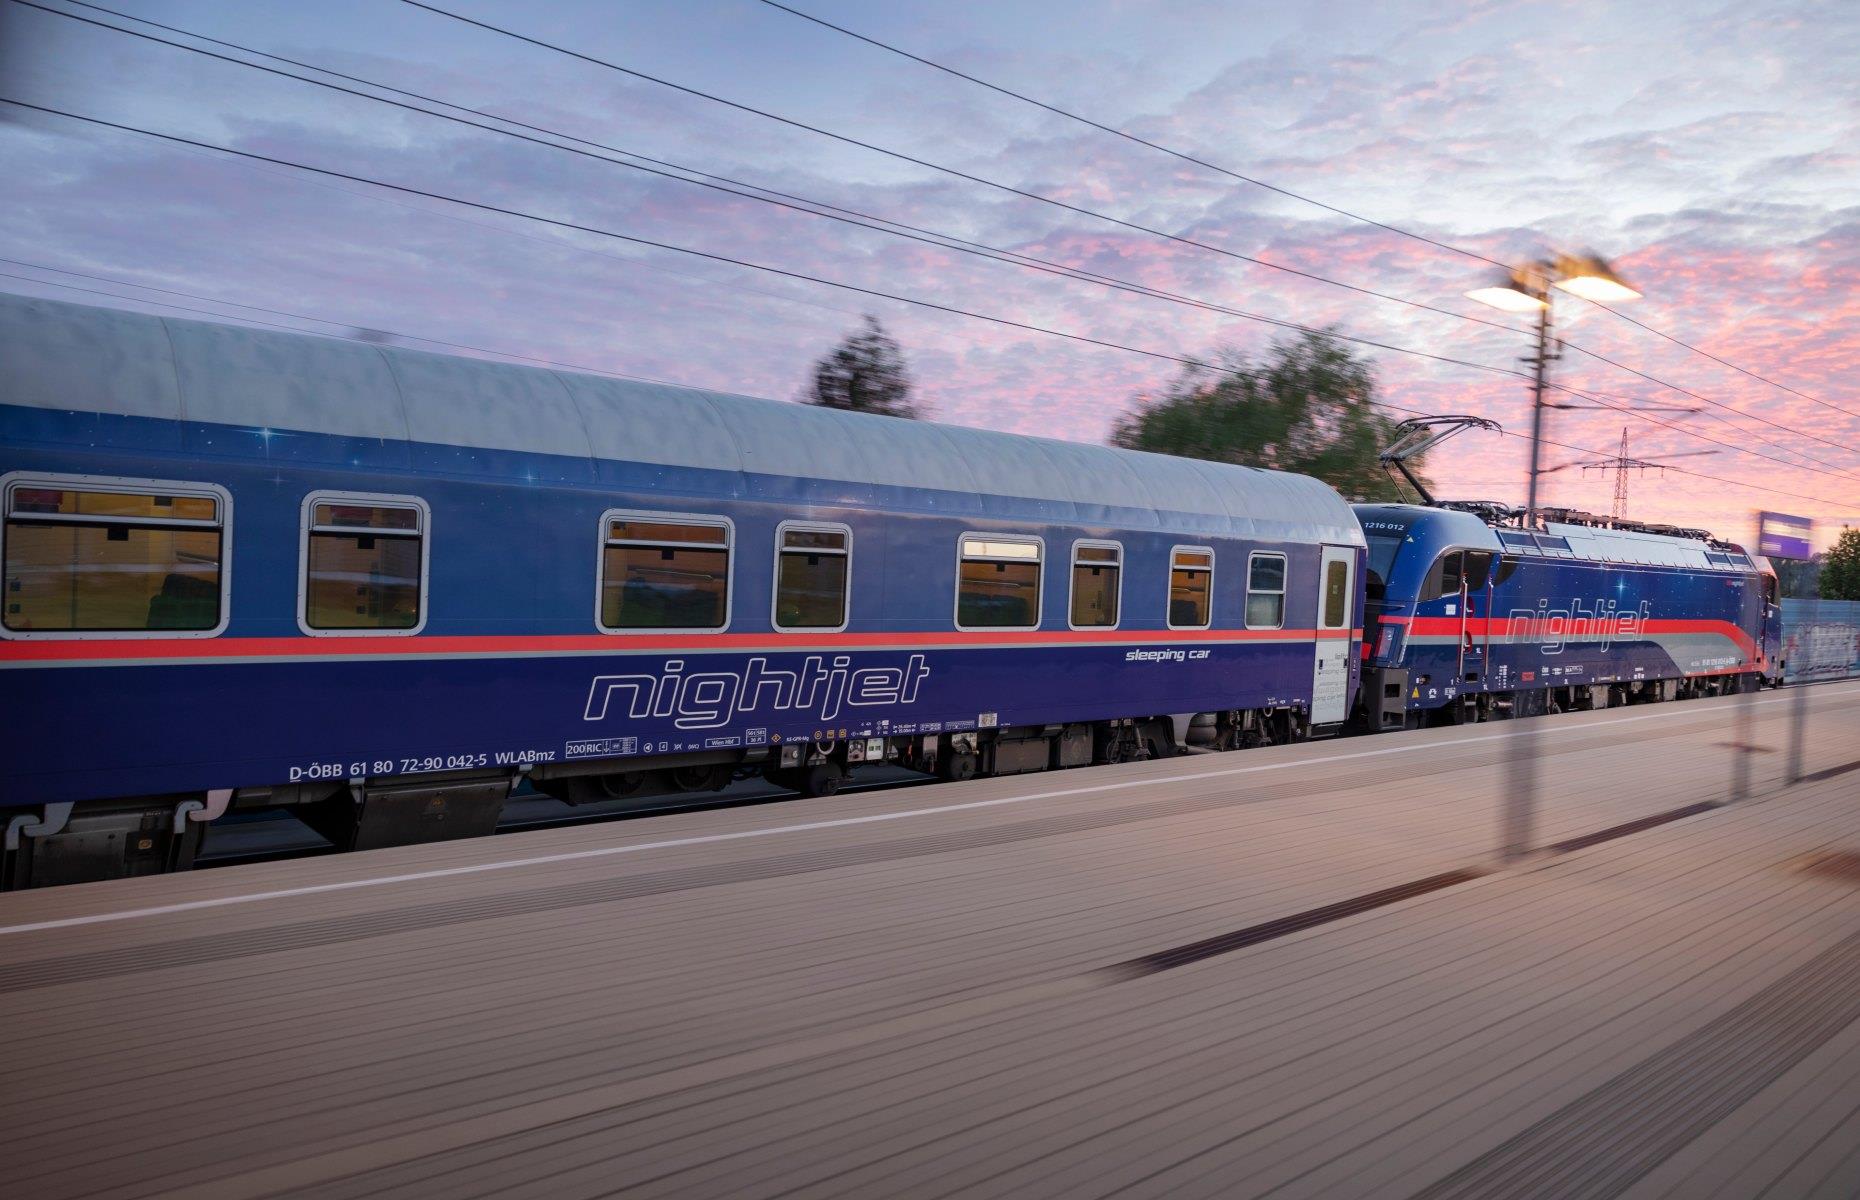 <p>OBB’s signature overnight trains came onto the European sleeper circuit back in 2016, and they’ve been going from strength to strength ever since. 2023 is set to be a landmark year for <a href="https://www.nightjet.com/en/#/home">Nightjet</a>, with a fleet of brand-new modern trains entering service from summer onwards, offering everything from wireless charging stations and ambient lighting to private en-suite sleeper compartments, solo snoozing pods and bike storage. Not only that, but the operator’s revamped 2023 timetable has opened up a slew of new possibilities for rail travellers in Europe.</p>